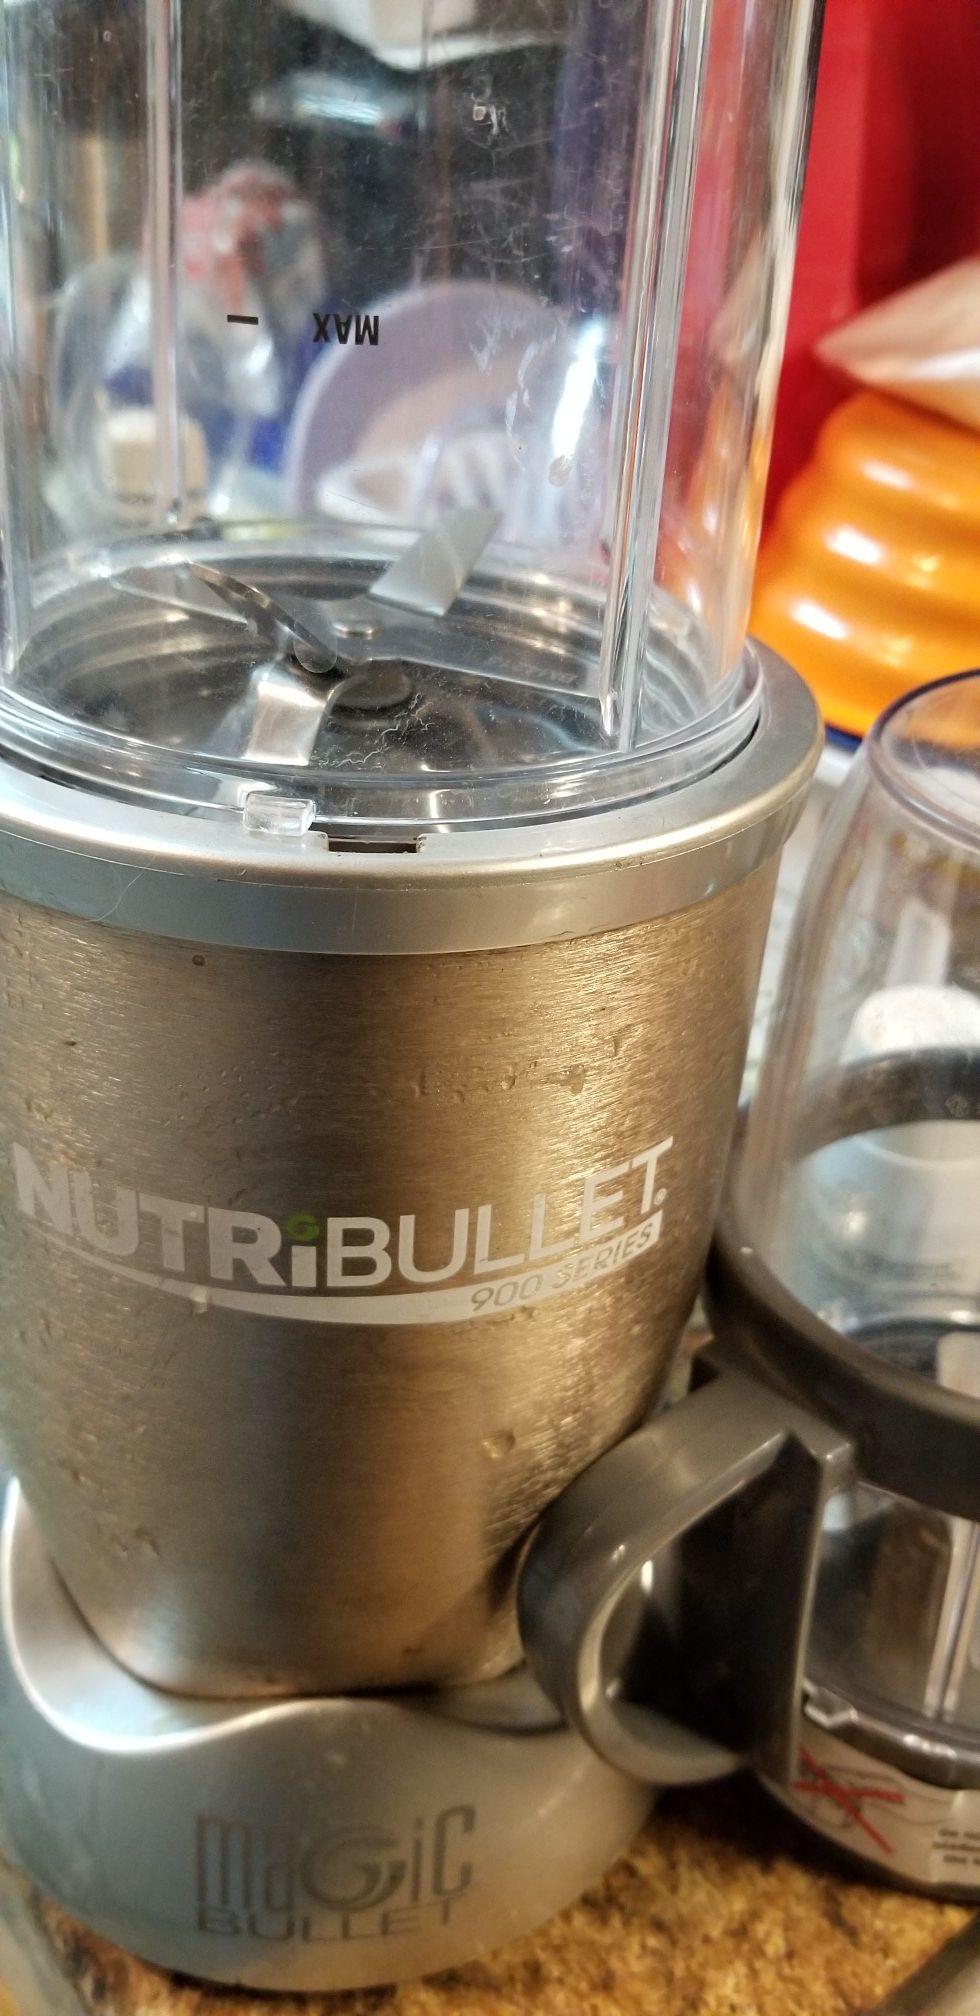 NutriBullet and drinking cup